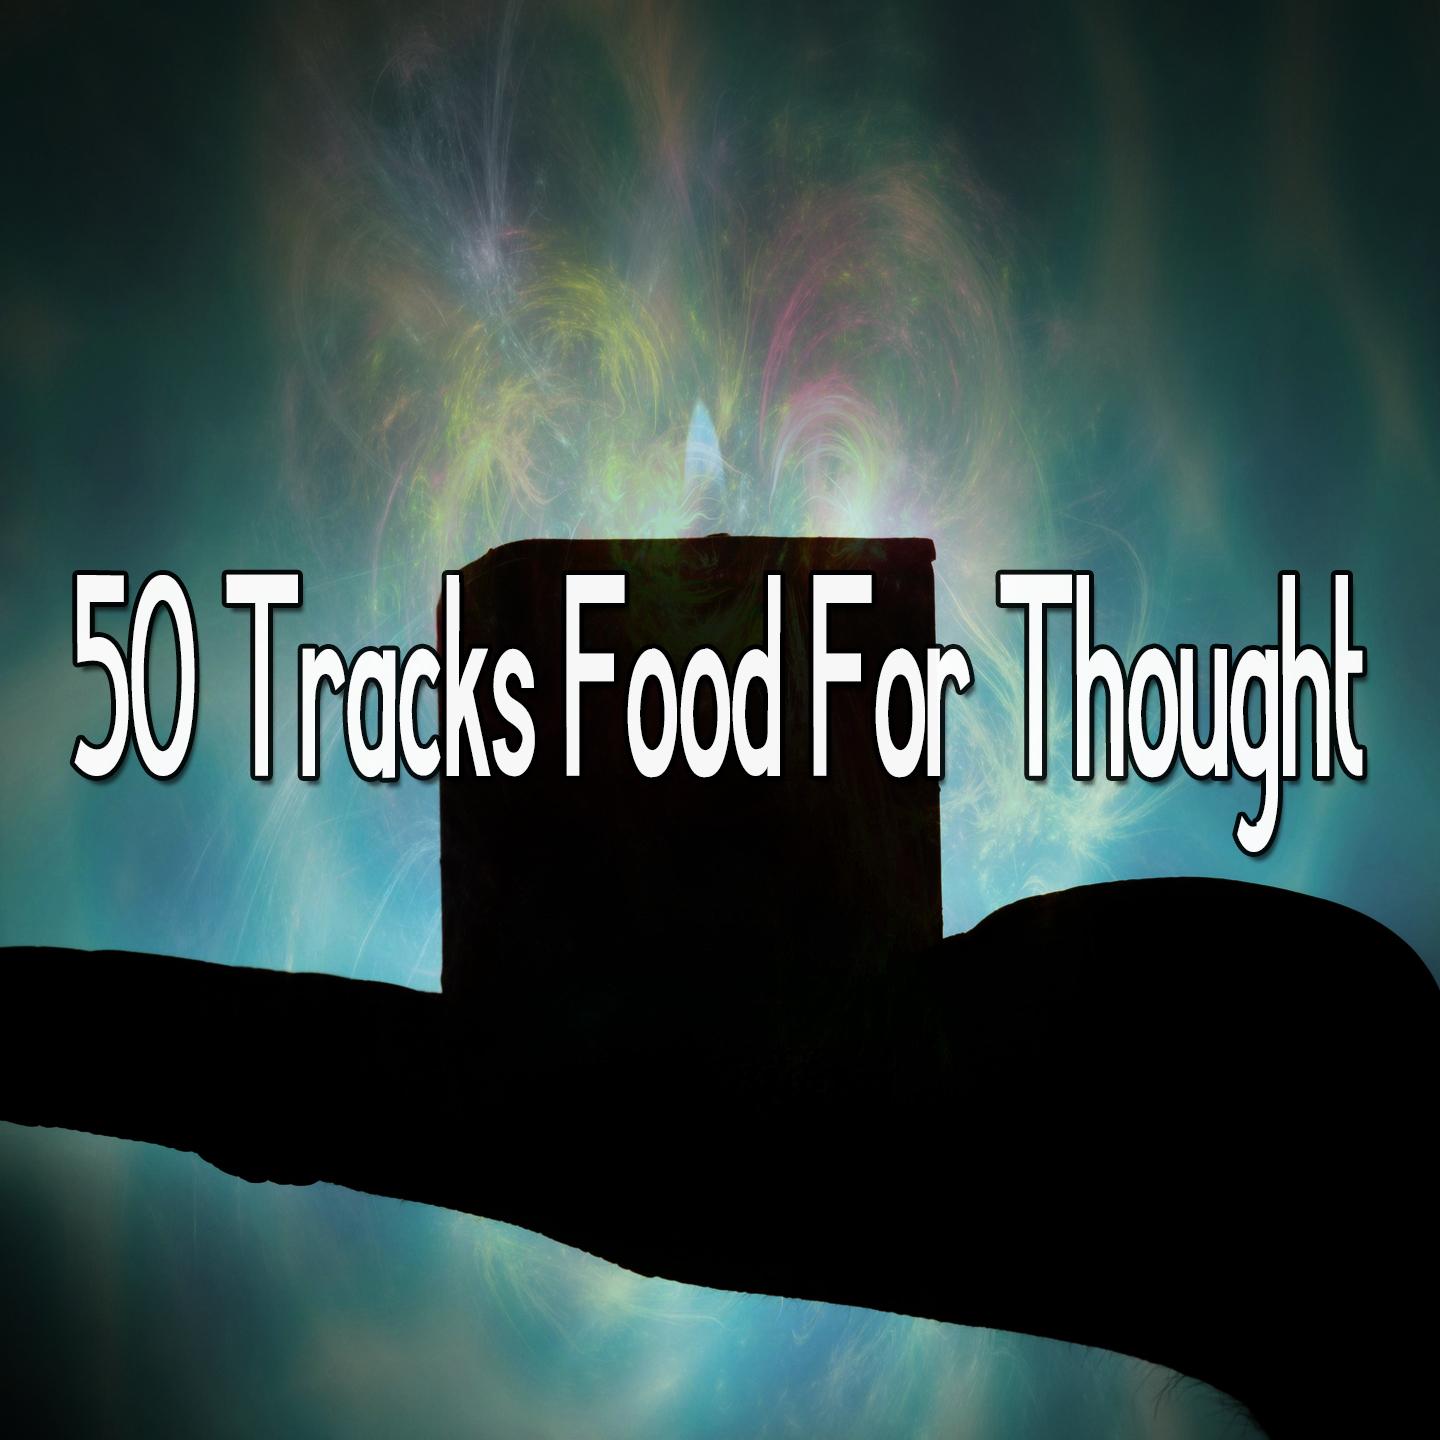 50 Tracks Food For Thought